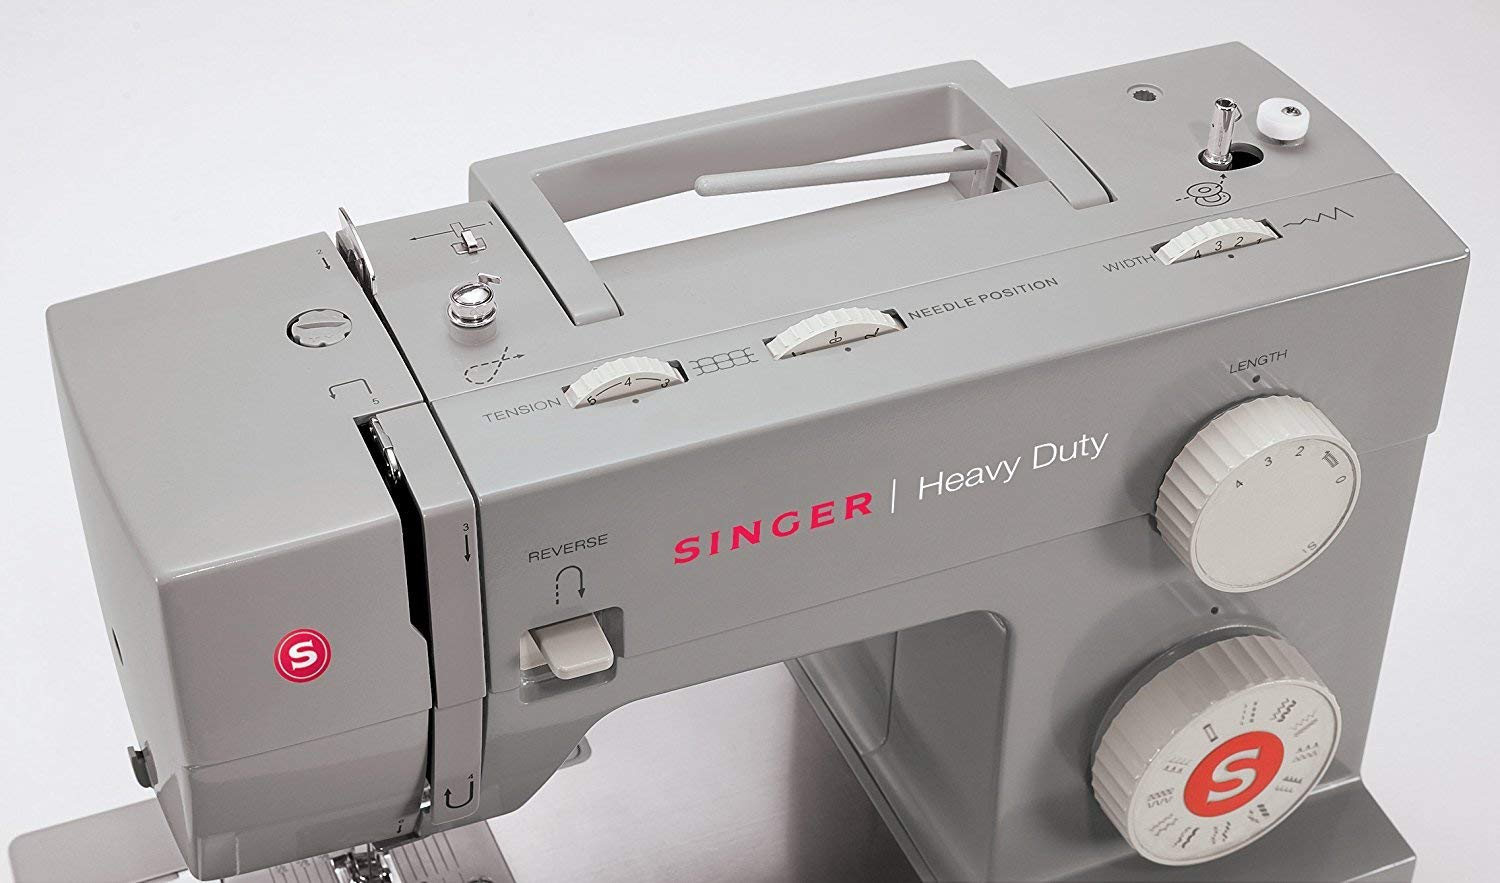 Singer Heavy Duty Sewing Machine - Durable Good Quality